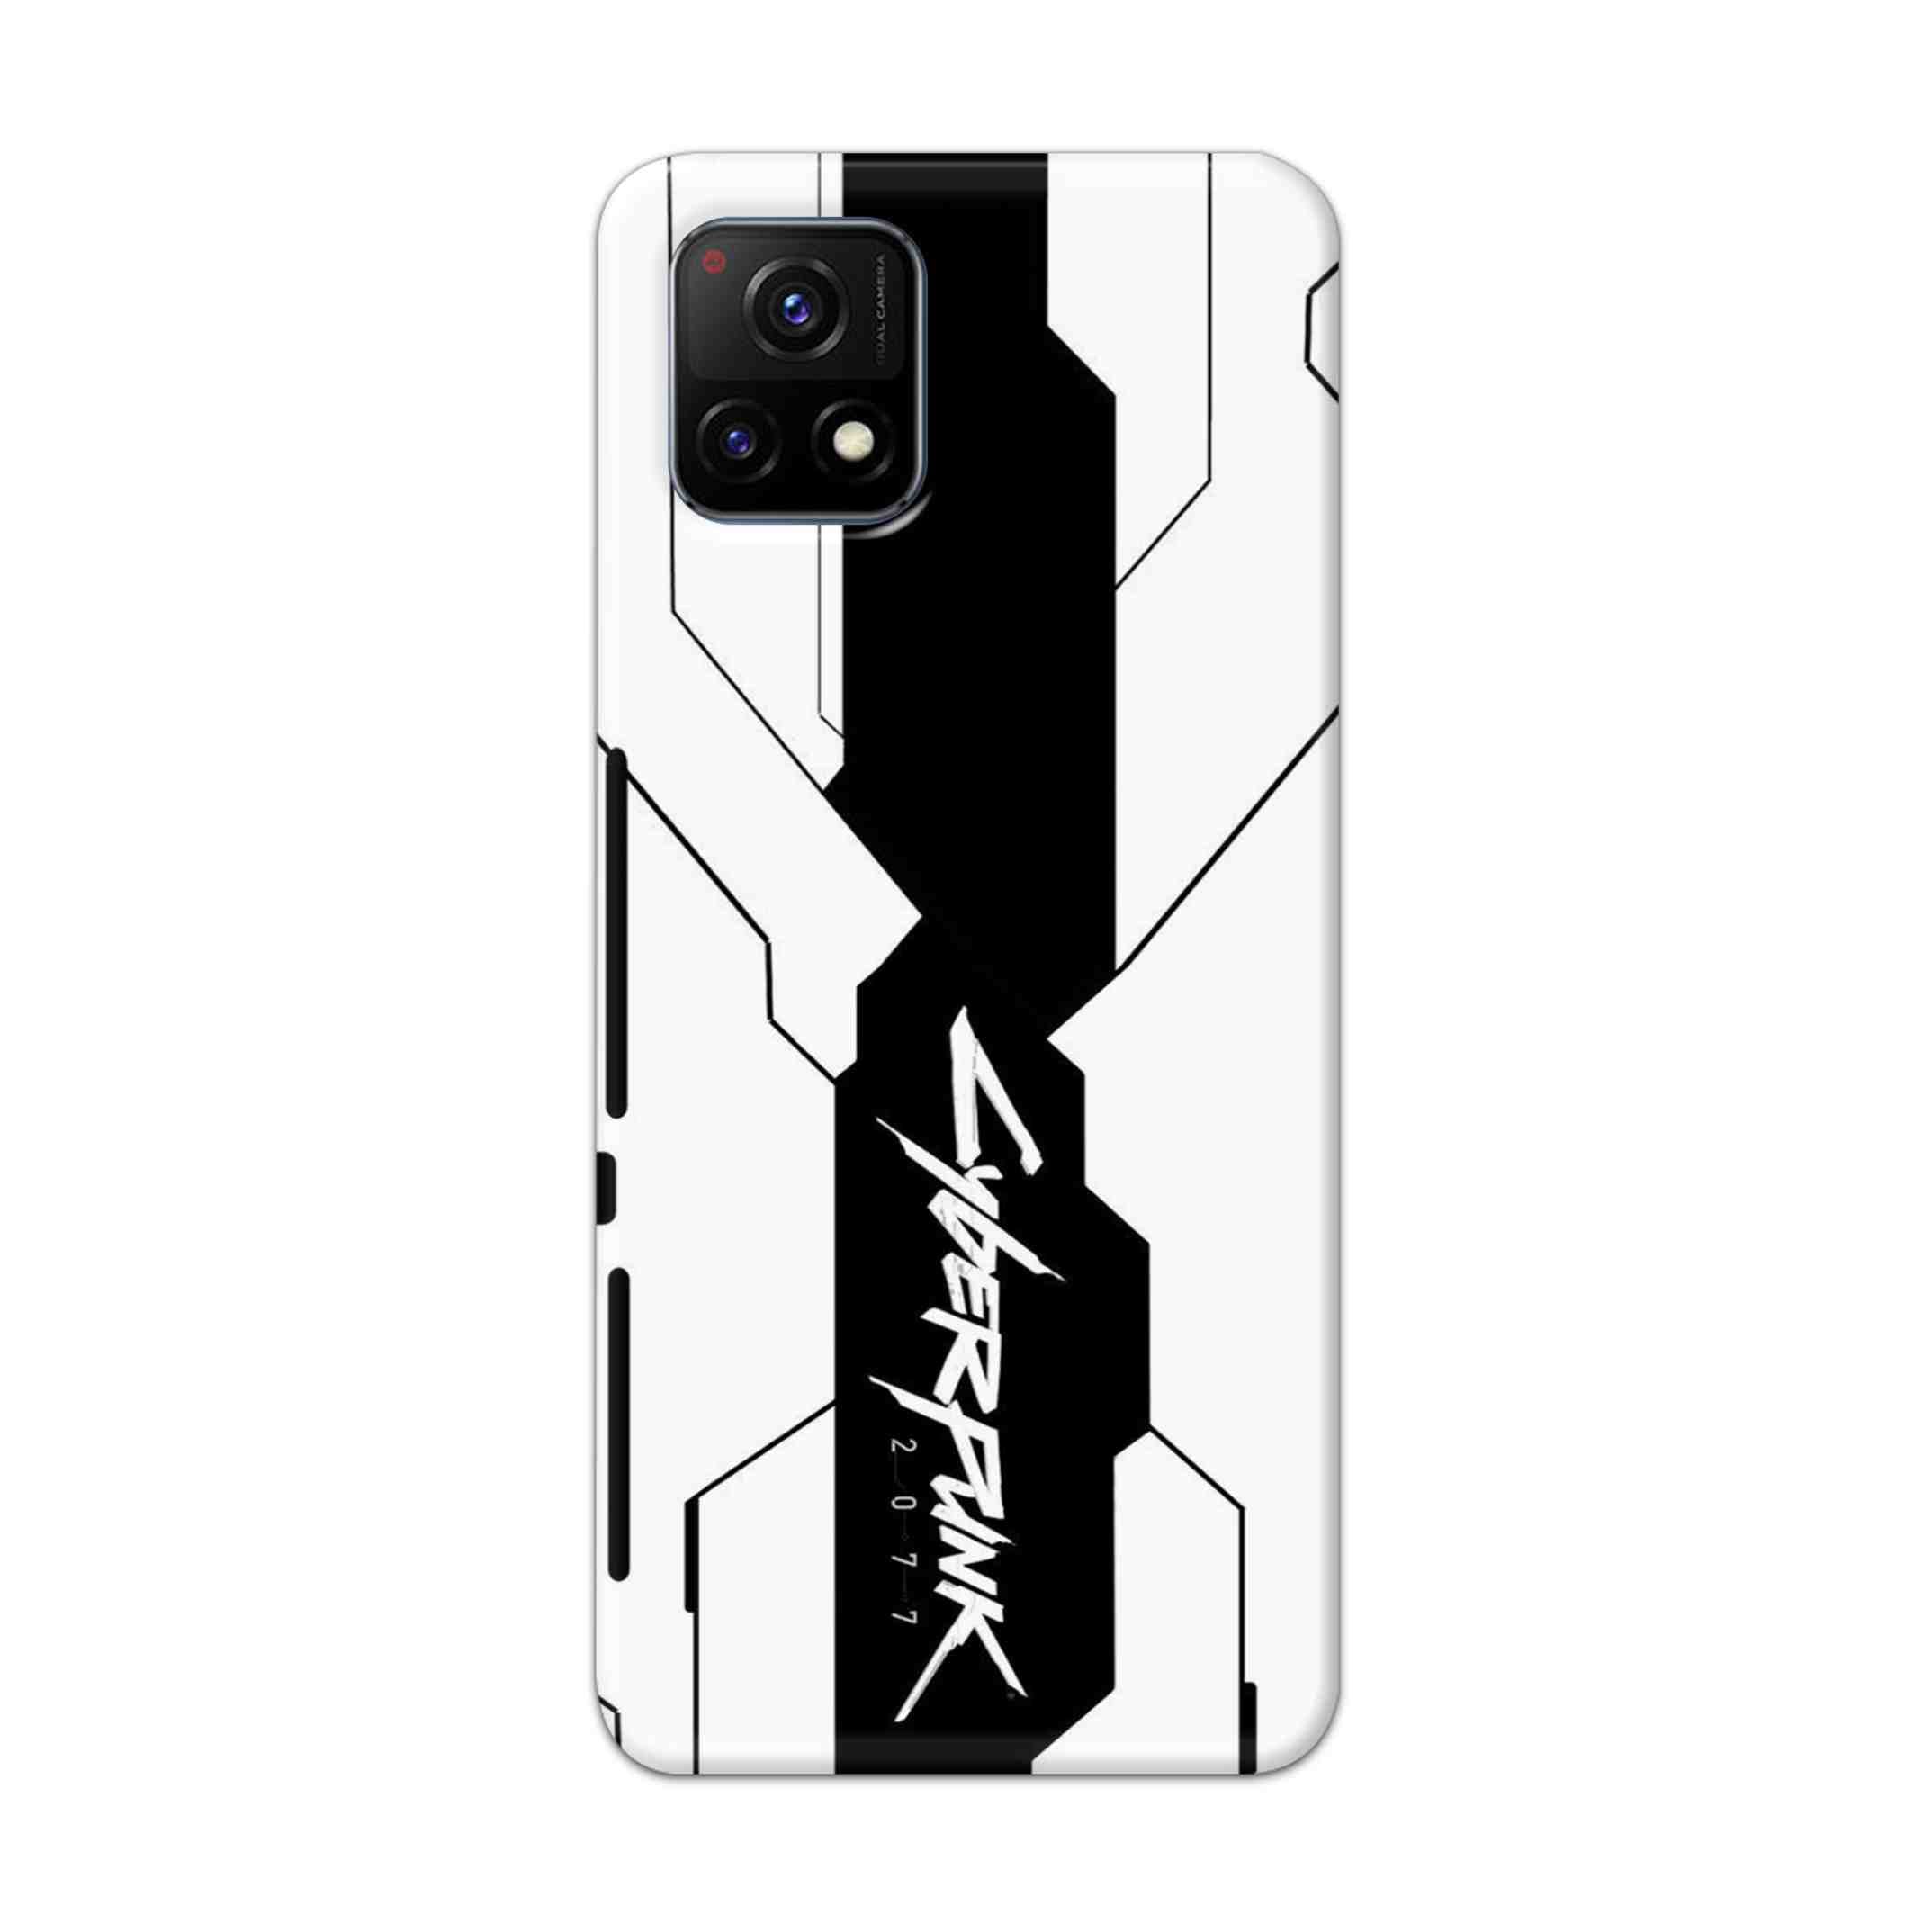 Buy Cyberpunk 2077 Hard Back Mobile Phone Case Cover For Vivo Y72 5G Online